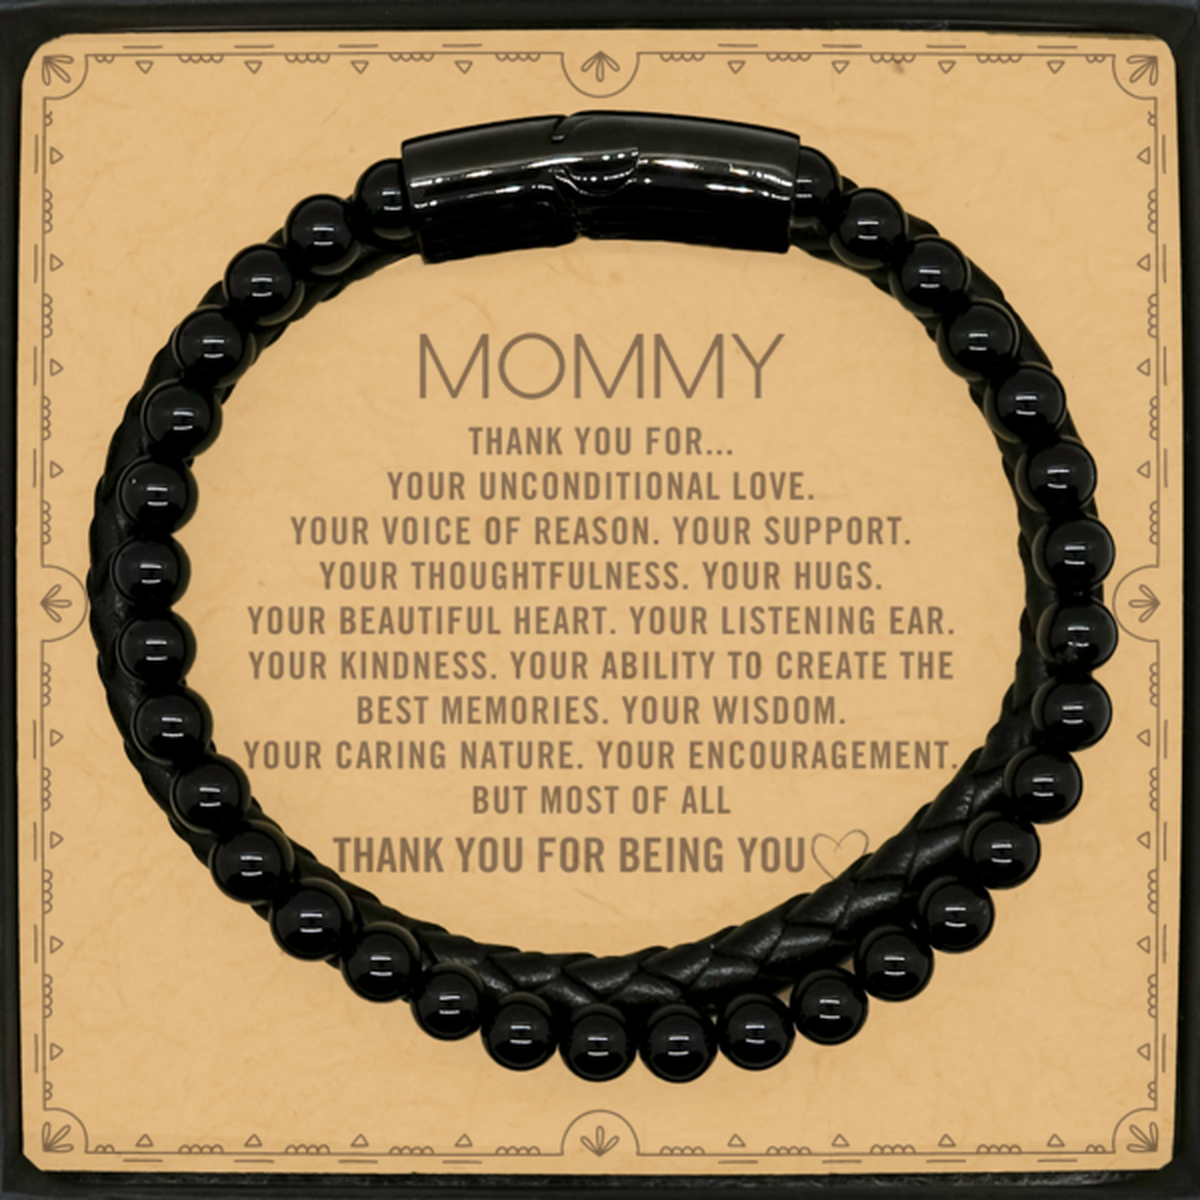 Mommy Stone Leather Bracelets Custom, Message Card Gifts For Mommy Christmas Graduation Birthday Gifts for Men Women Mommy Thank you for Your unconditional love